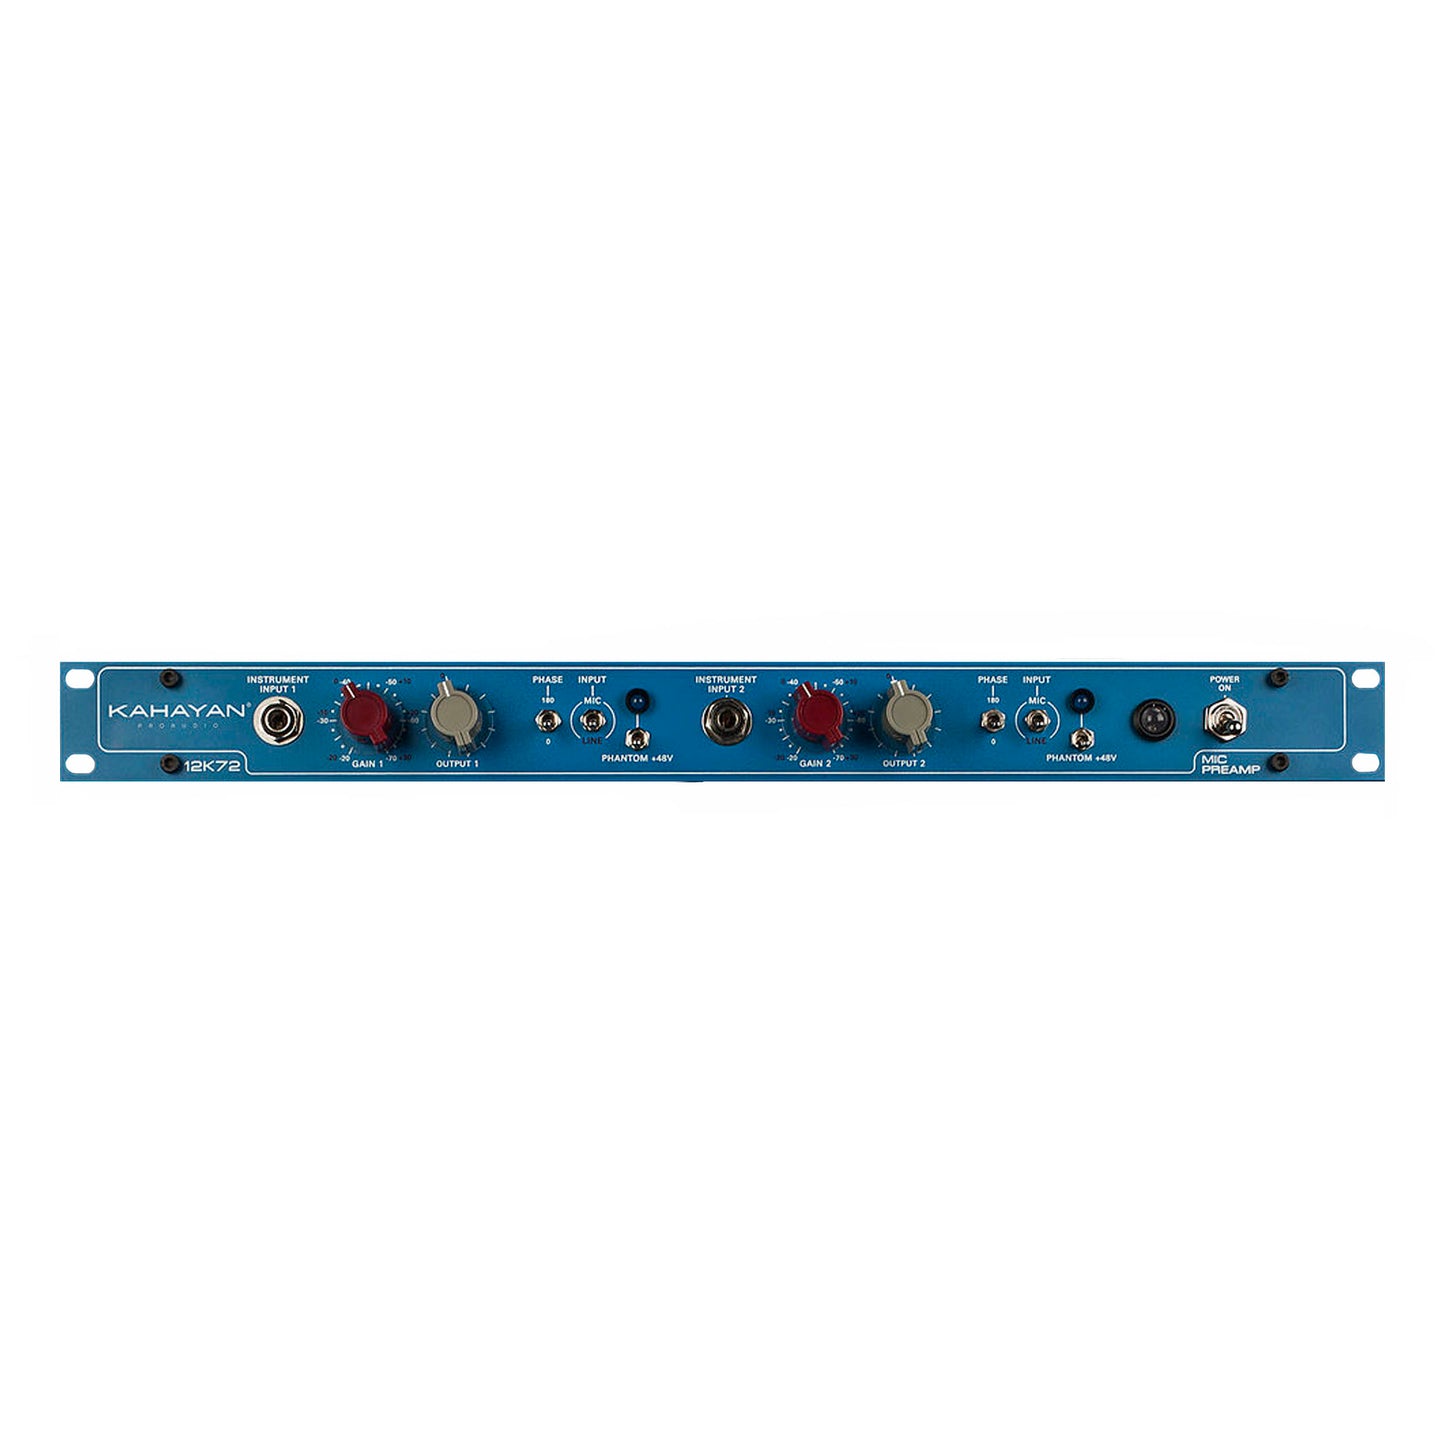 Kahayan 12K72 Stereo Mic Preamp